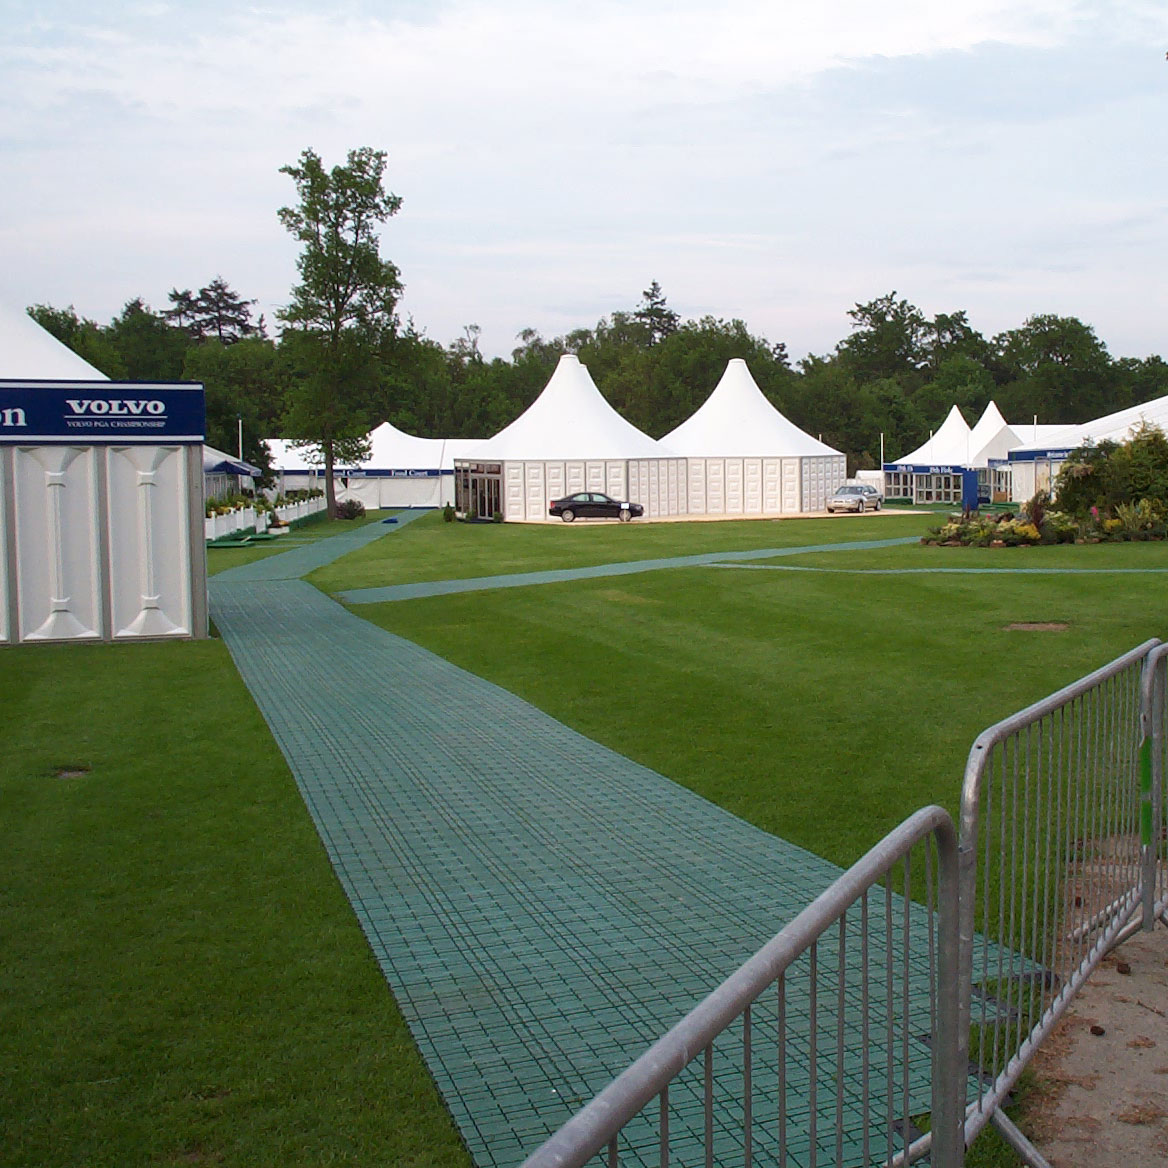 Outdoor event temporary pathways | Rola-Trac